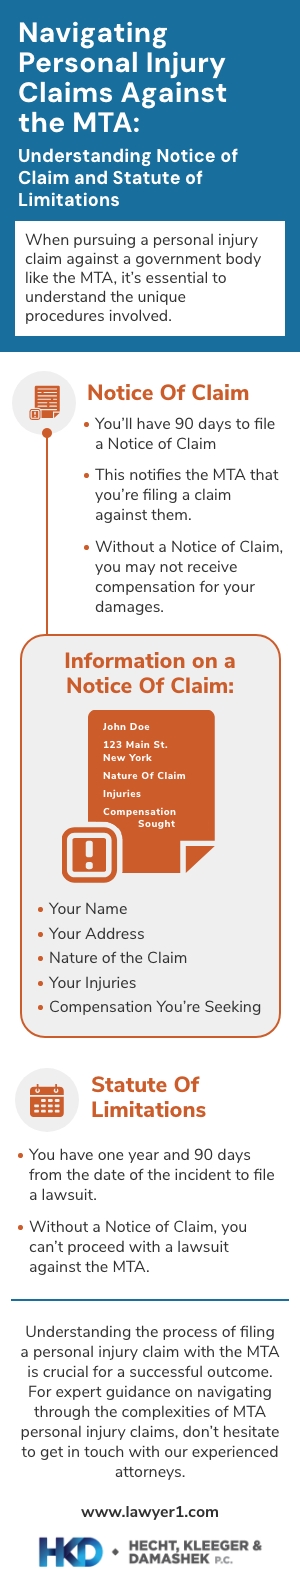 infographic about personal injury claims against the MTA in New York